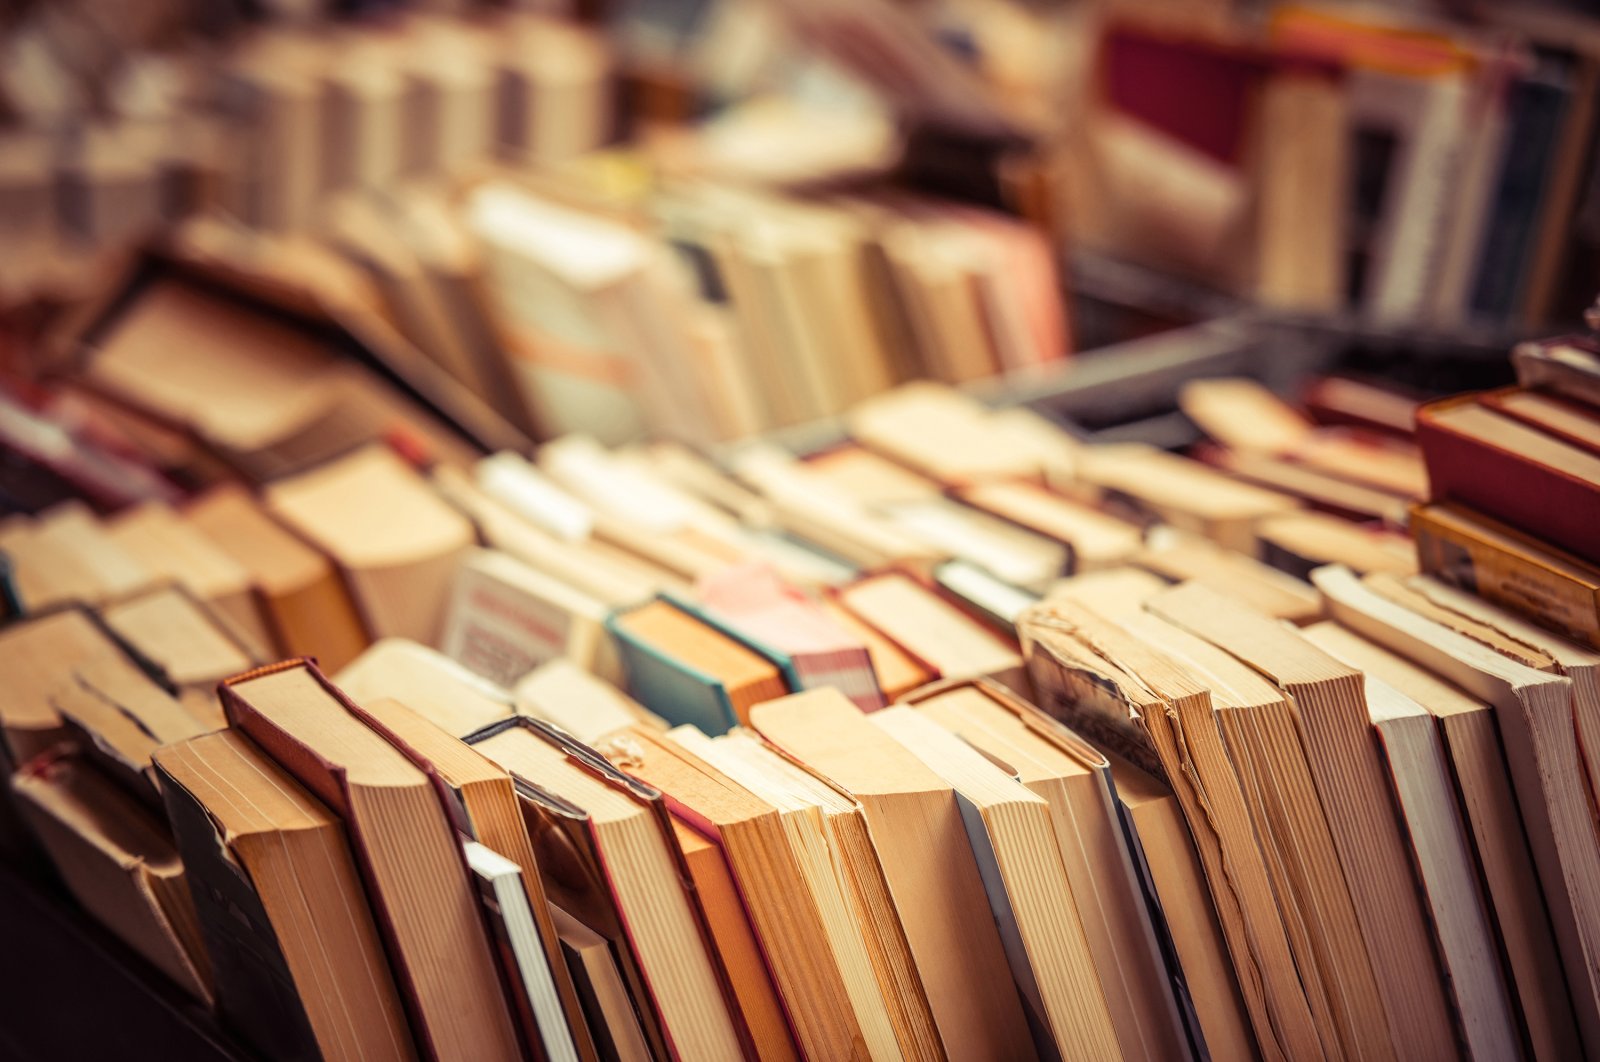 A book checked out a half-century ago has been anonymously returned to a library in northeastern Pennsylvania. (Shutterstock Photo)